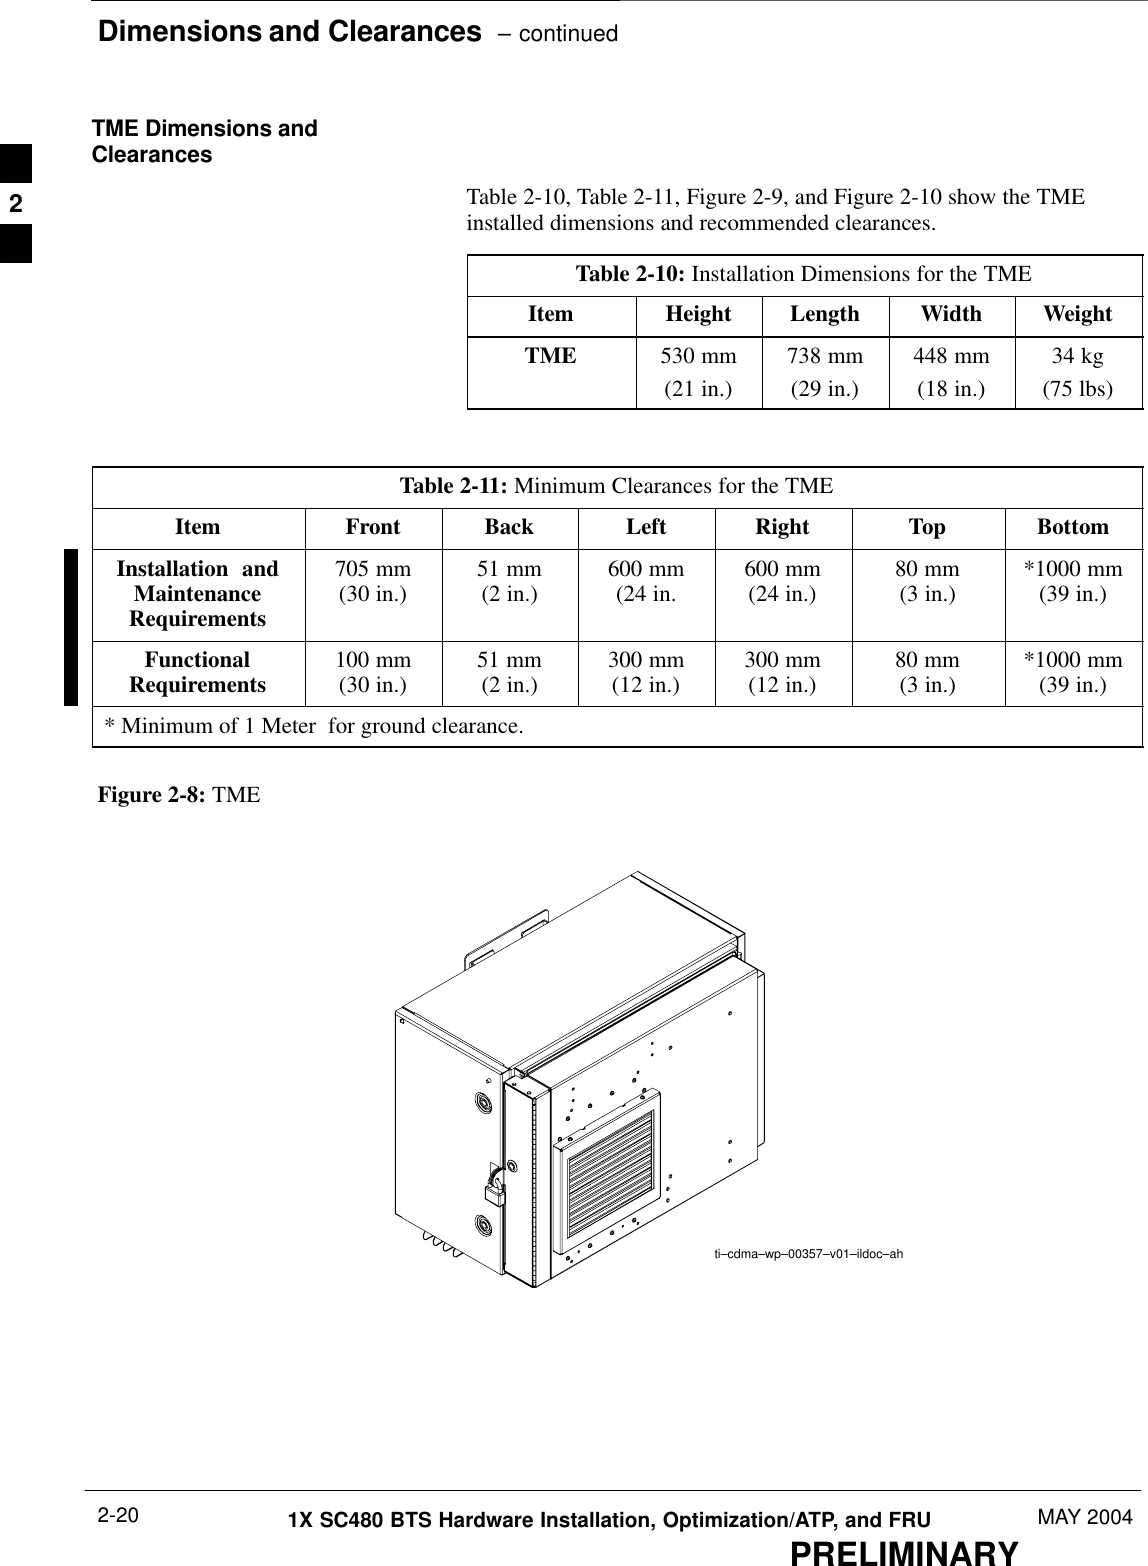 Dimensions and Clearances  – continuedPRELIMINARY1X SC480 BTS Hardware Installation, Optimization/ATP, and FRU MAY 20042-20TME Dimensions andClearancesTable 2-10, Table 2-11, Figure 2-9, and Figure 2-10 show the TMEinstalled dimensions and recommended clearances.Table 2-10: Installation Dimensions for the TMEItem Height Length Width WeightTME 530 mm(21 in.)738 mm(29 in.)448 mm(18 in.)34 kg(75 lbs)Table 2-11: Minimum Clearances for the TMEItem Front Back Left Right Top BottomInstallation  andMaintenanceRequirements705 mm(30 in.) 51 mm(2 in.) 600 mm(24 in. 600 mm(24 in.) 80 mm(3 in.) *1000 mm(39 in.)FunctionalRequirements 100 mm(30 in.) 51 mm(2 in.) 300 mm(12 in.) 300 mm(12 in.) 80 mm(3 in.) *1000 mm(39 in.)* Minimum of 1 Meter  for ground clearance.Figure 2-8: TMEti–cdma–wp–00357–v01–ildoc–ah2